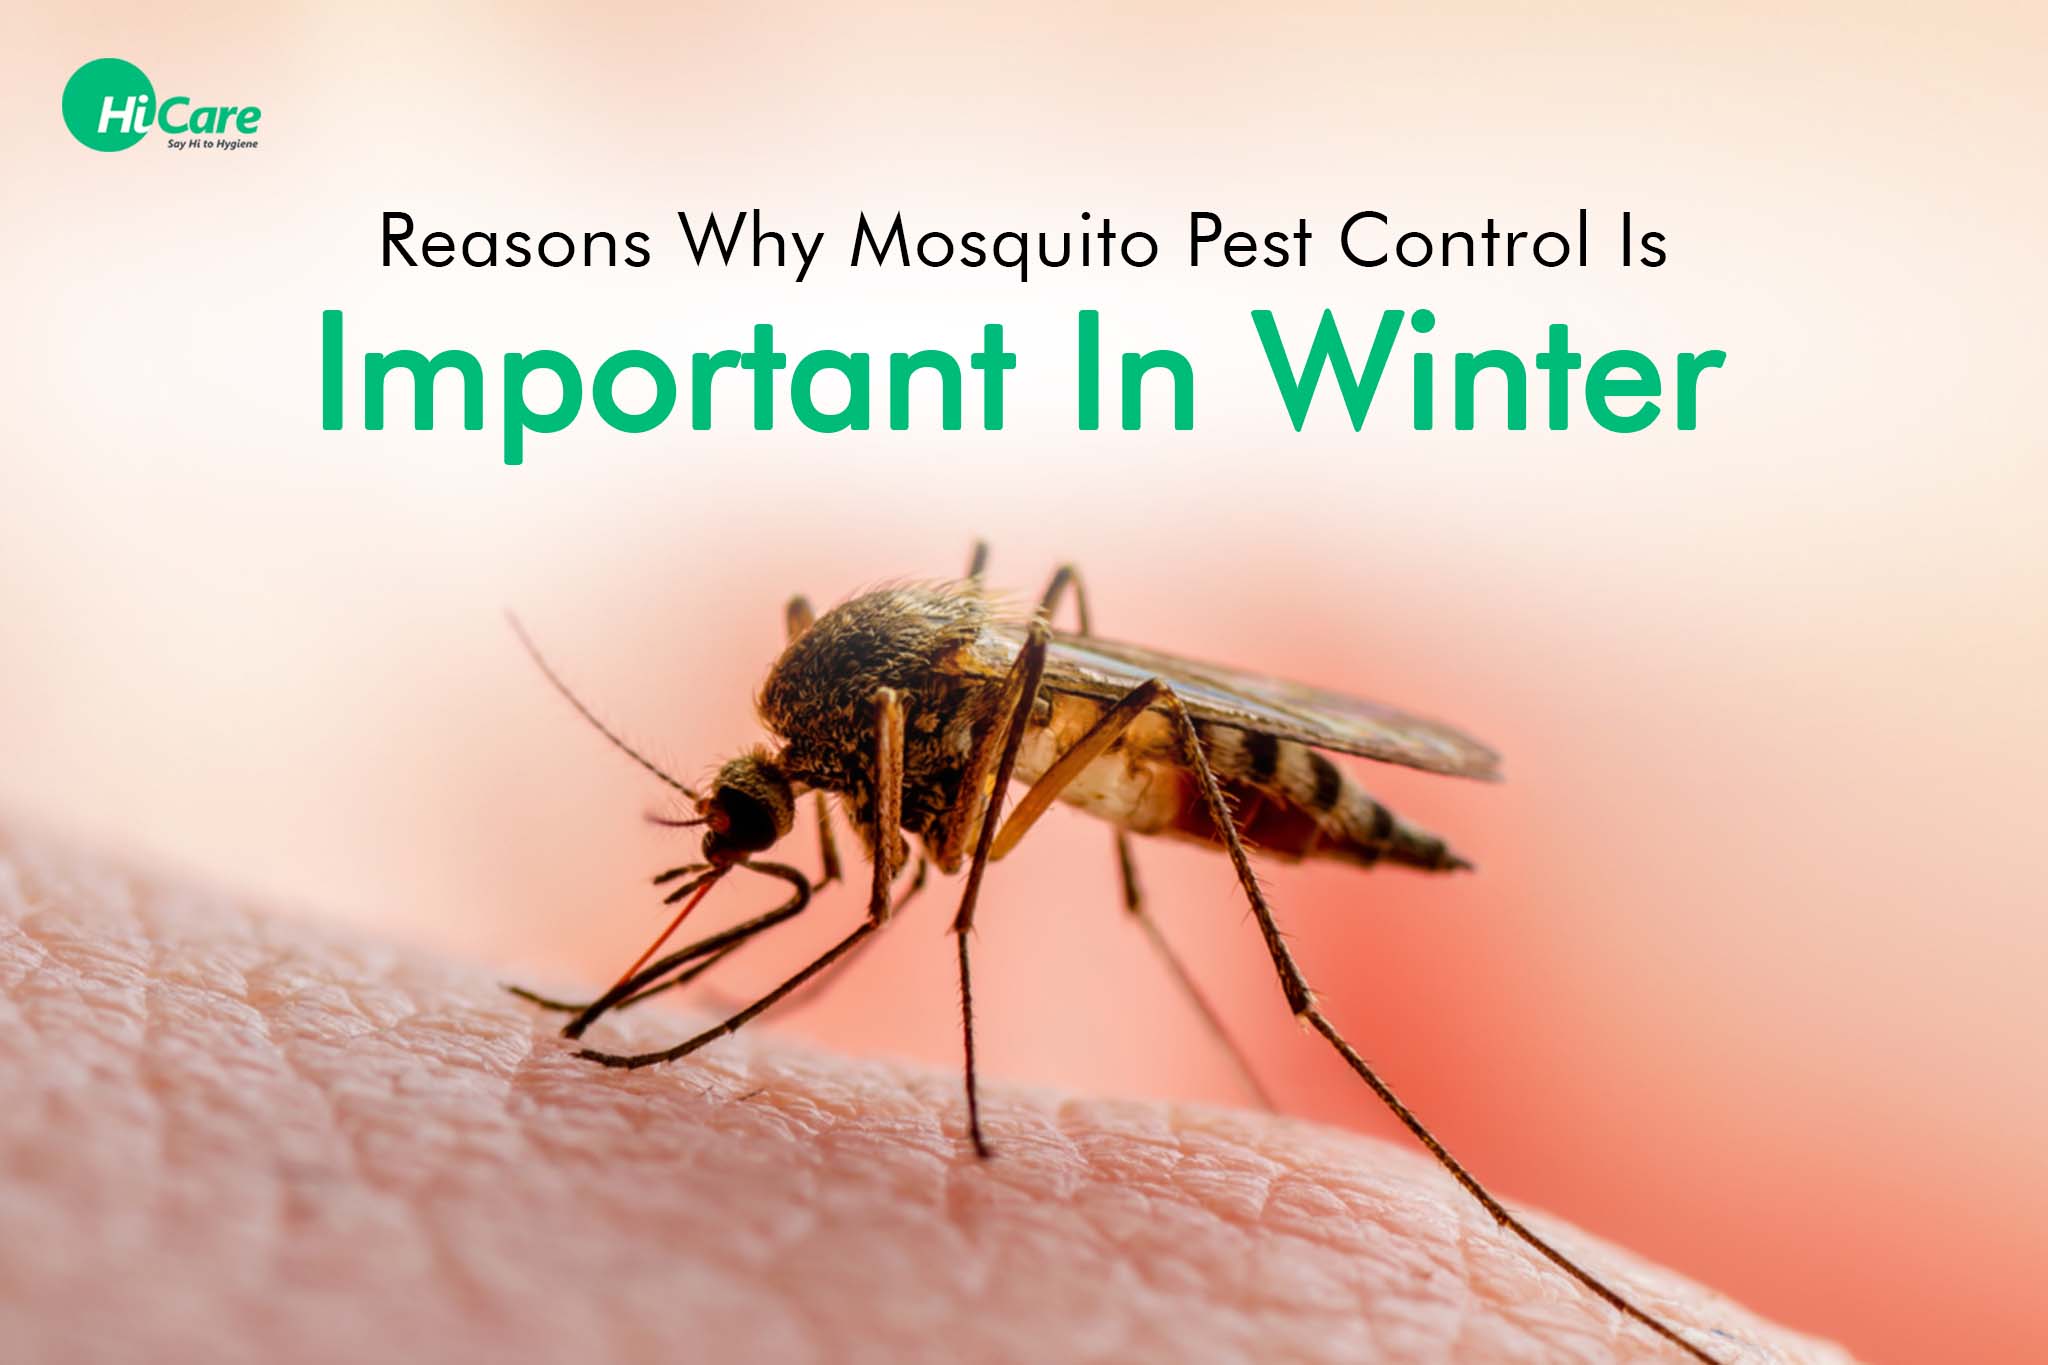 5 reasons why mosquito pest control is important in winter